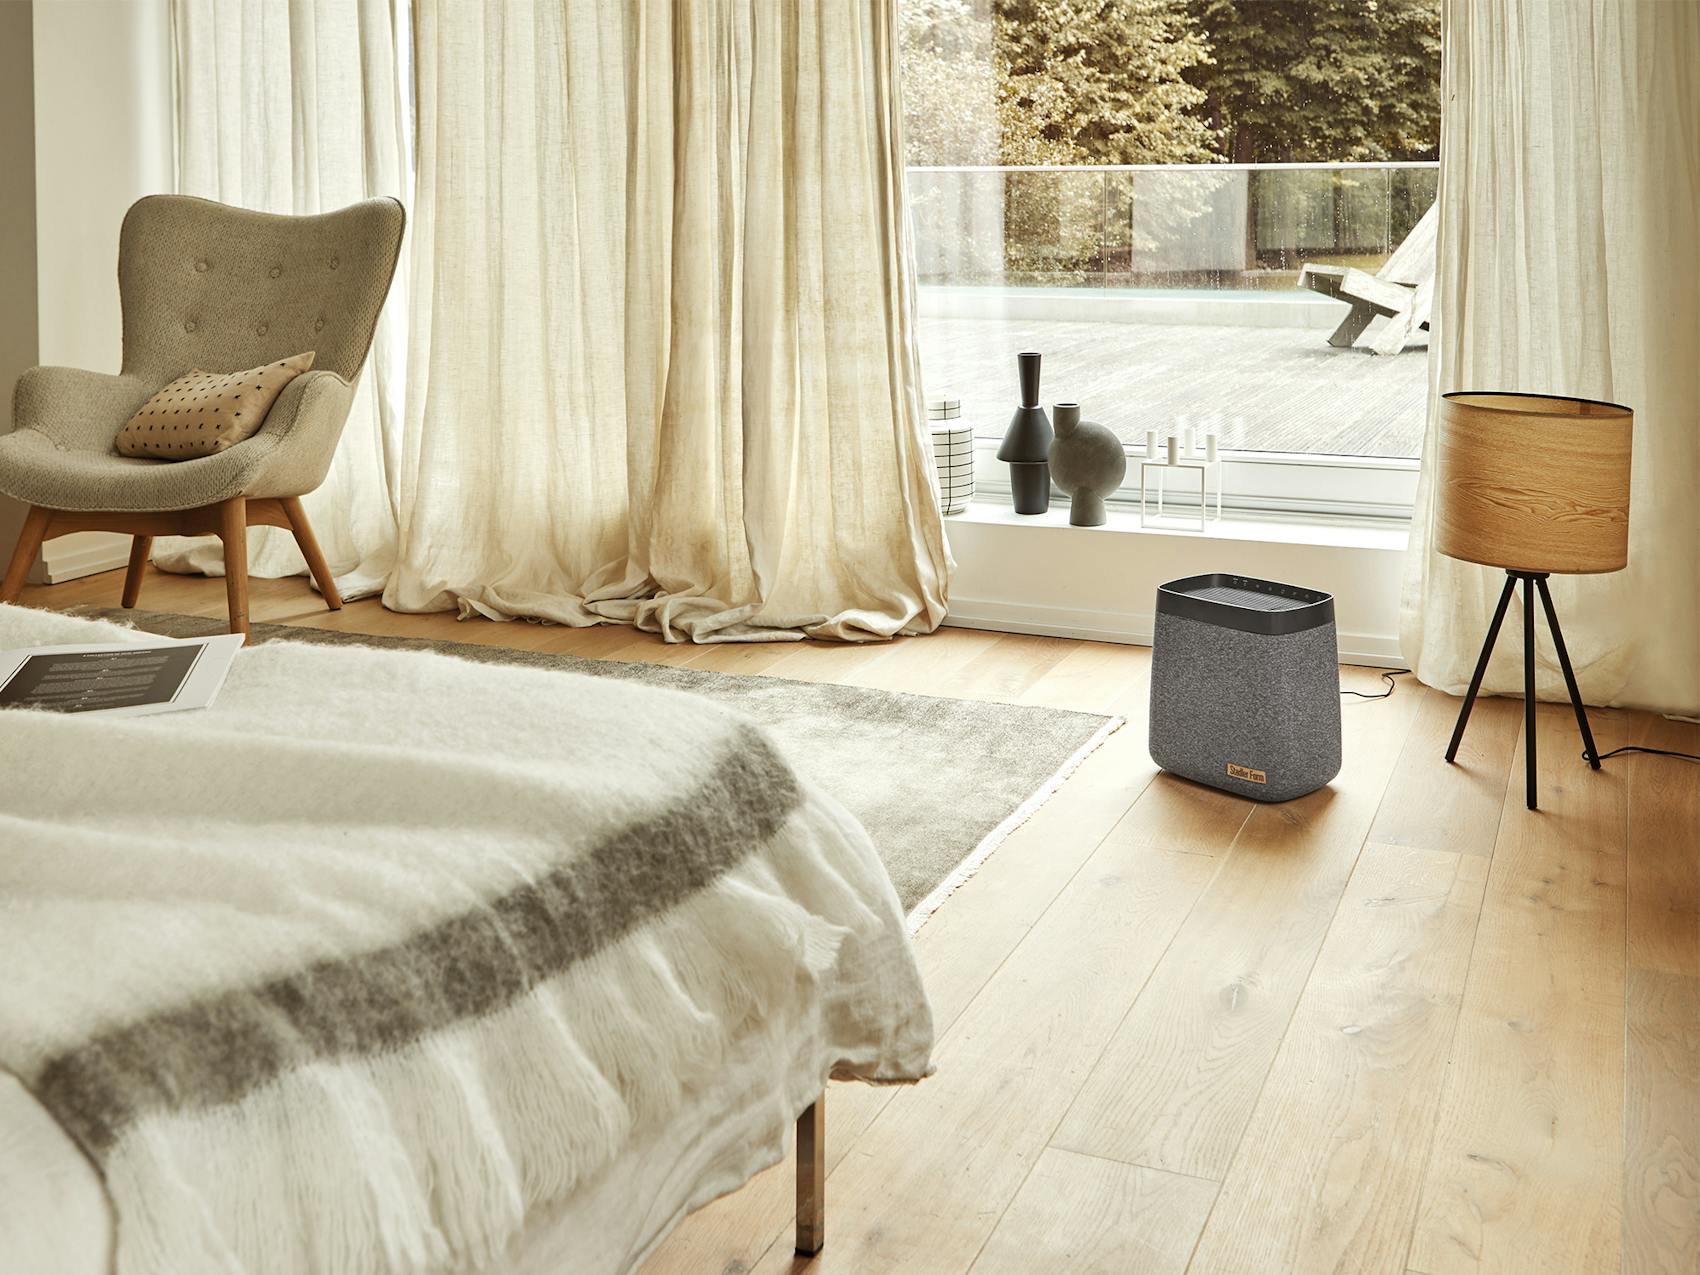 Karl humidifier by Stadler Form in a bed room